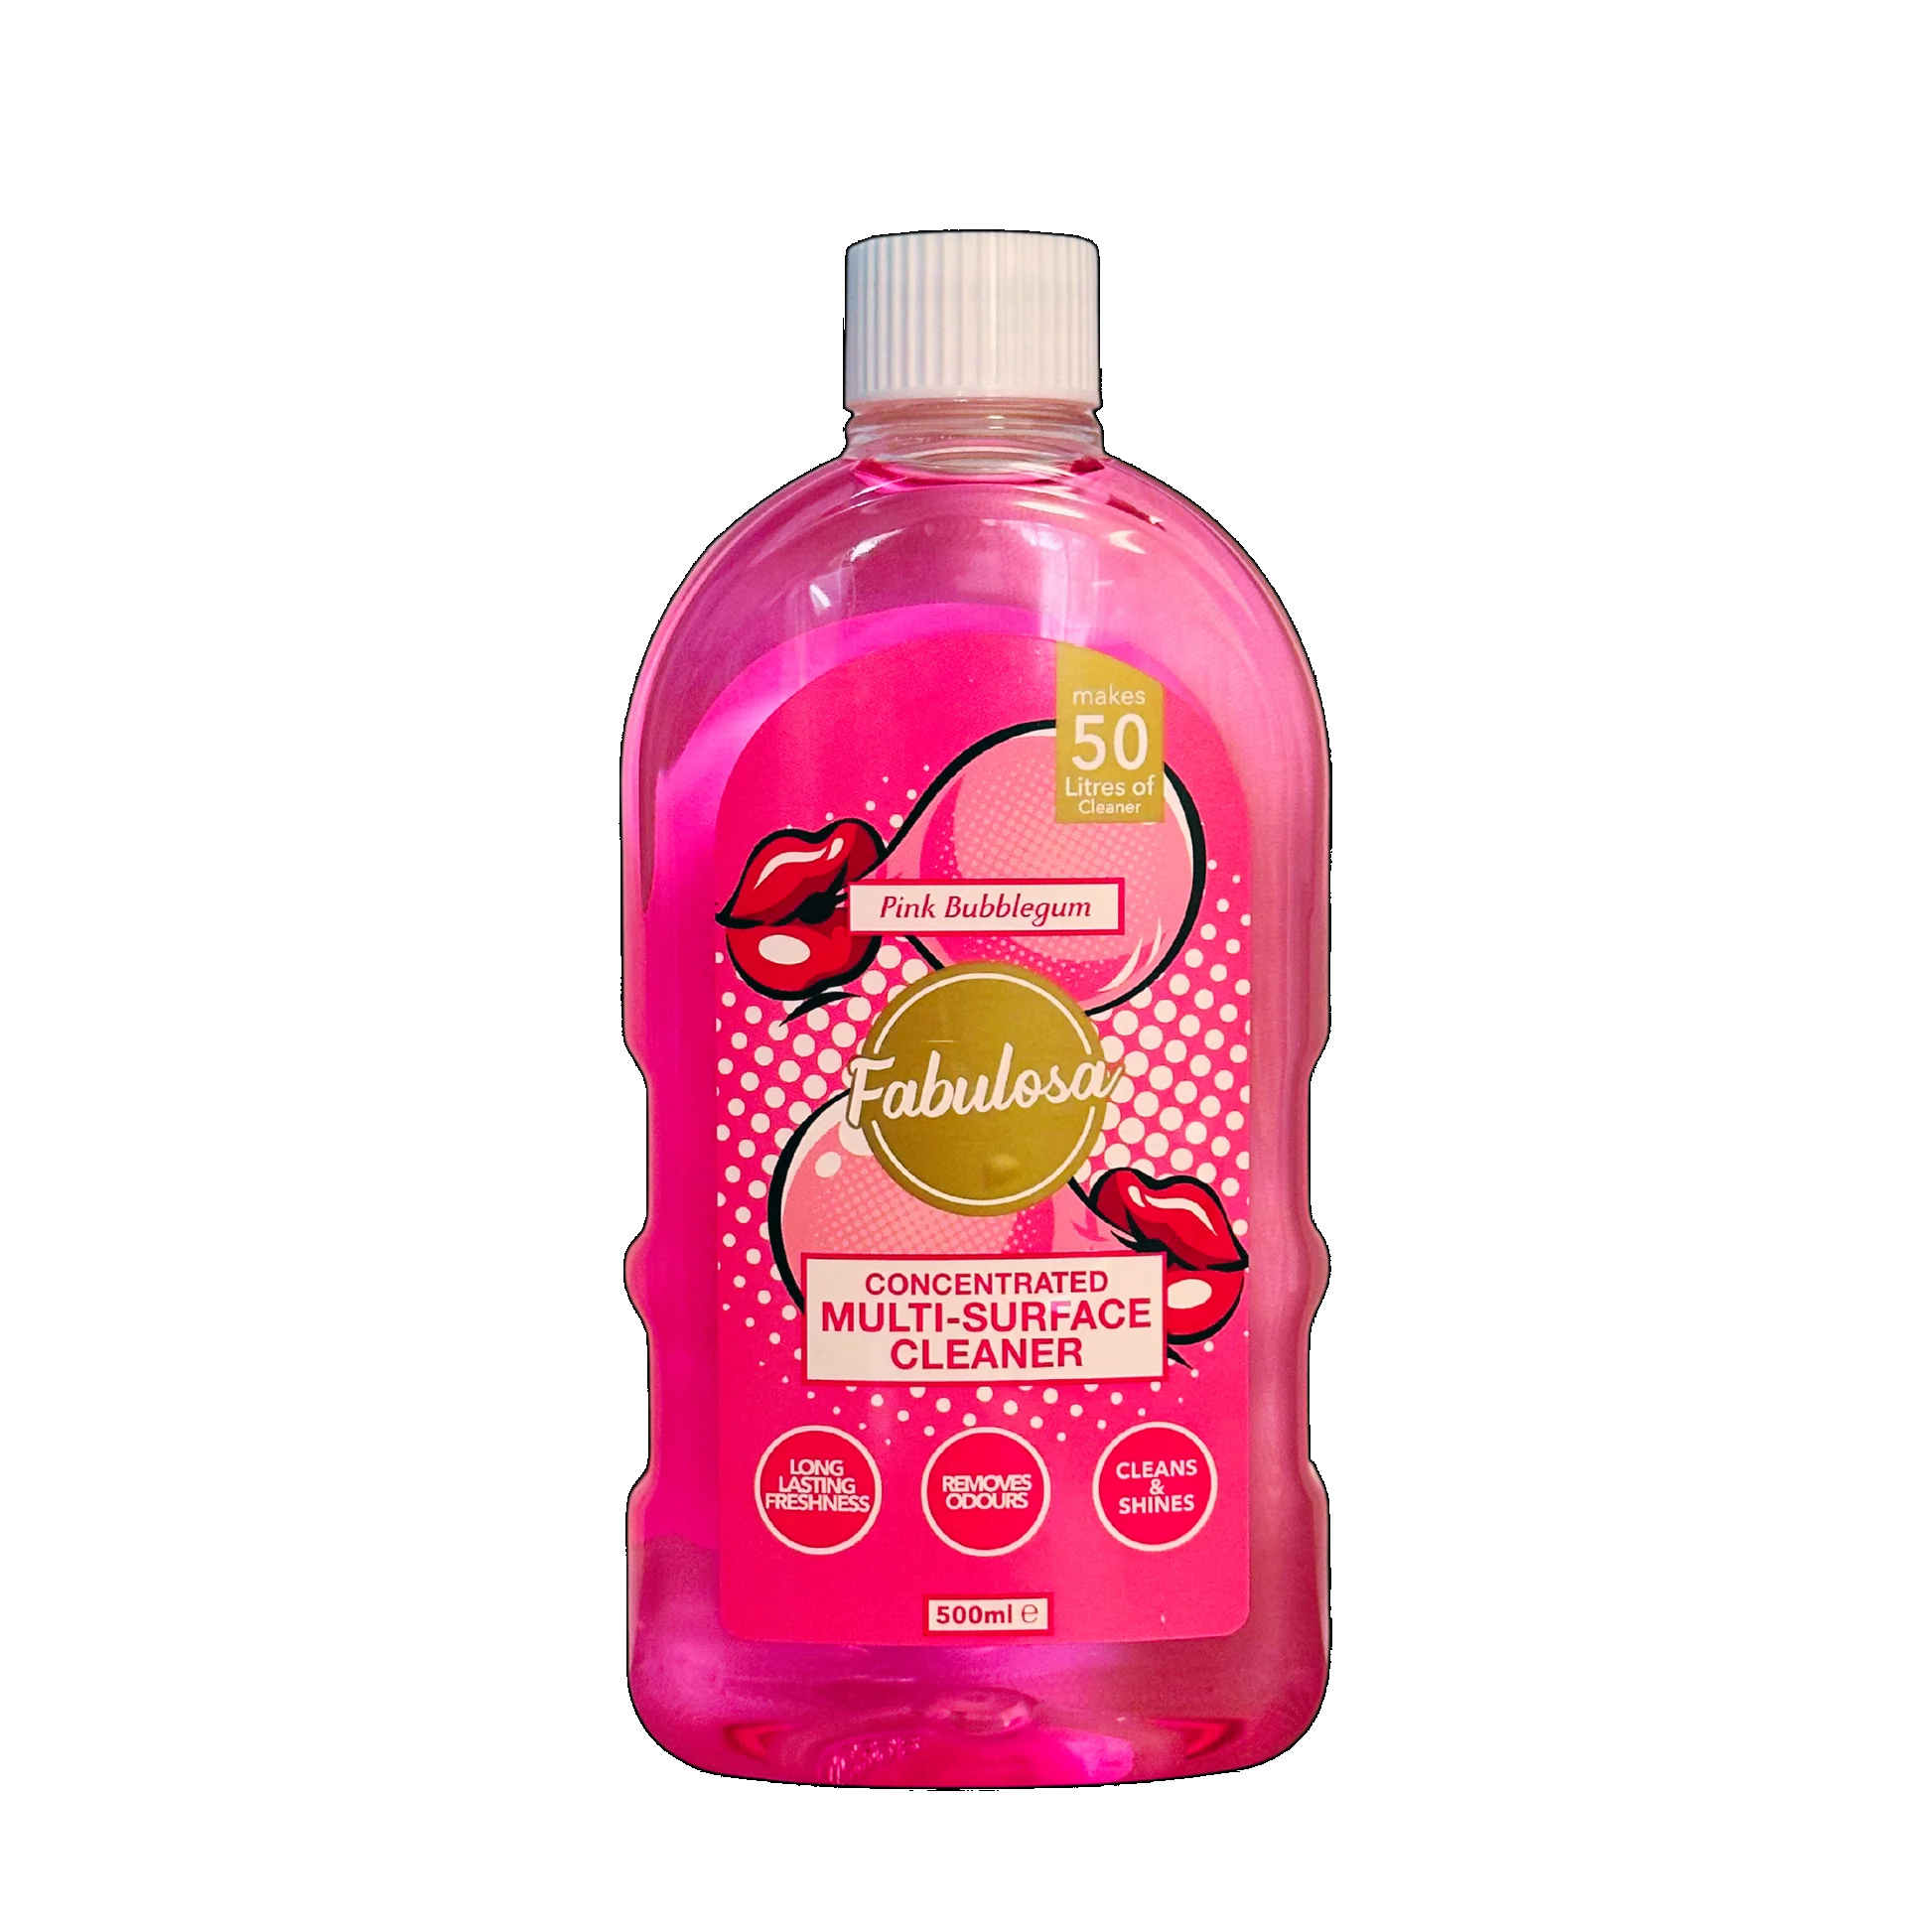 Fabulosa Concentrated Multi Surface Cleaner - Pink Bubblegum – The